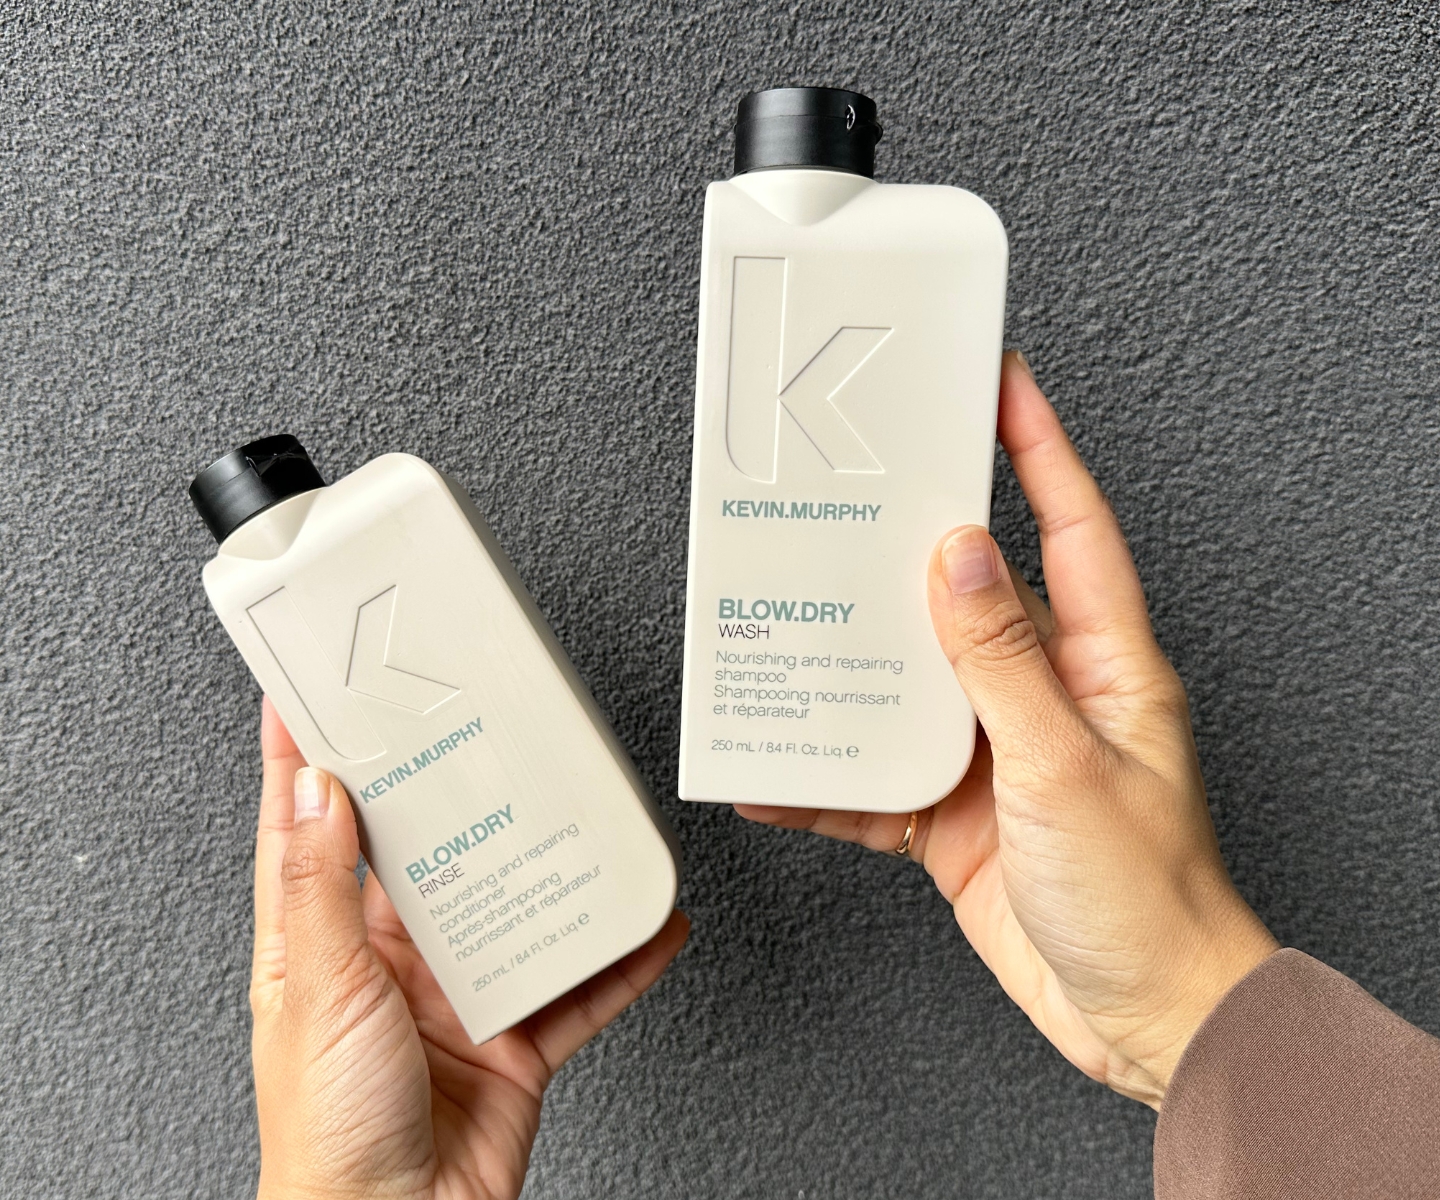 BLOW.DRY Wash and Rinse kevin murphy shampoo and conditioner